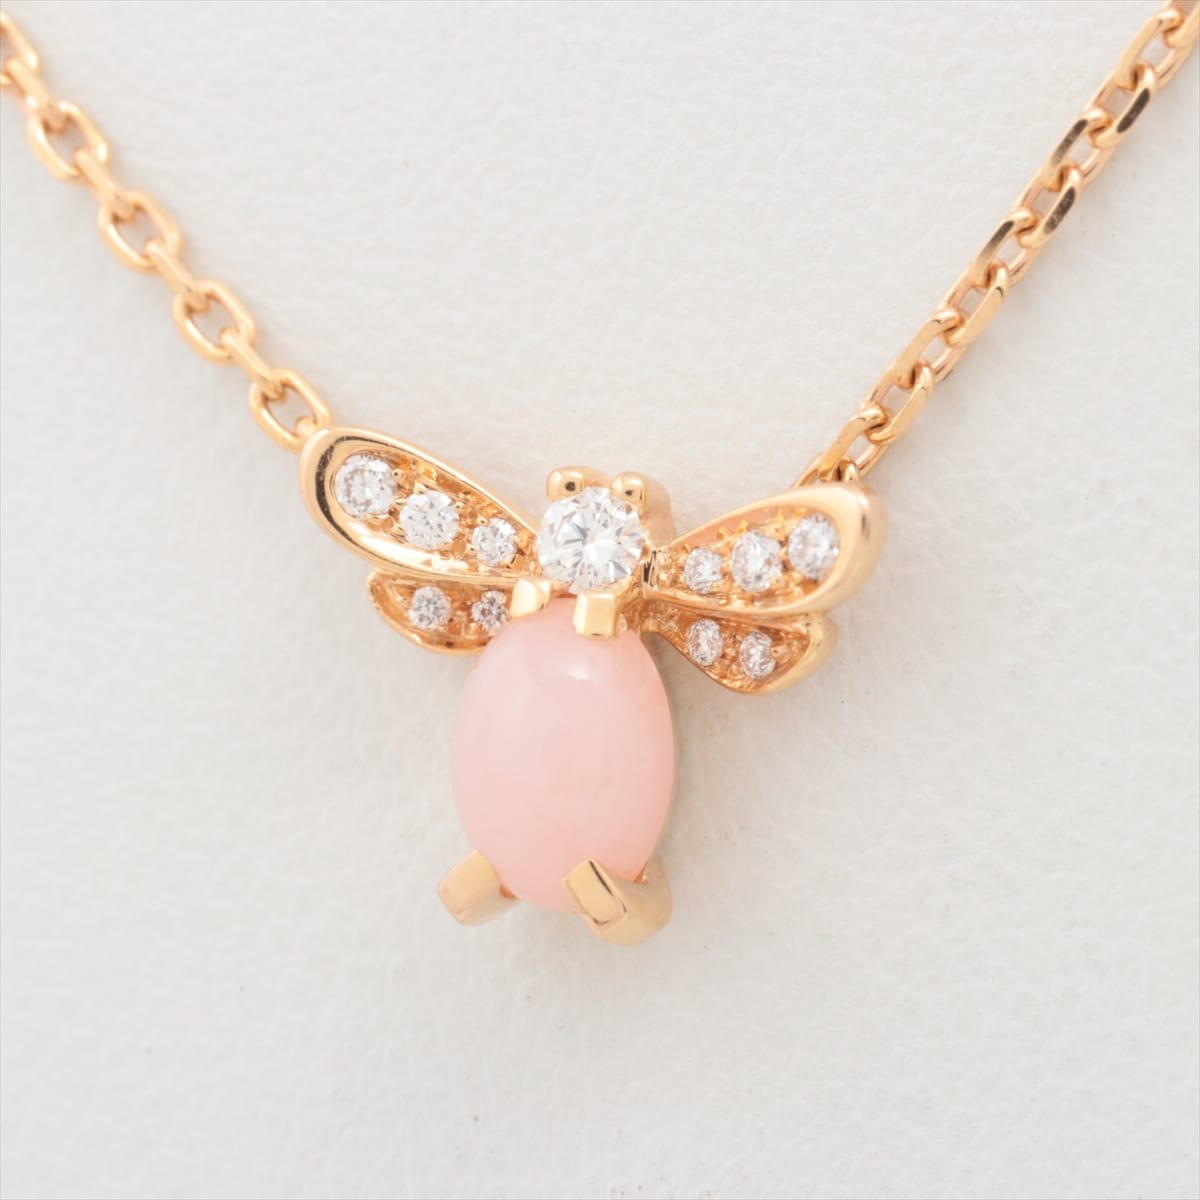 Chaumet Attrape-moi Pink Opal diamond Necklace 750(PG) 3.7g